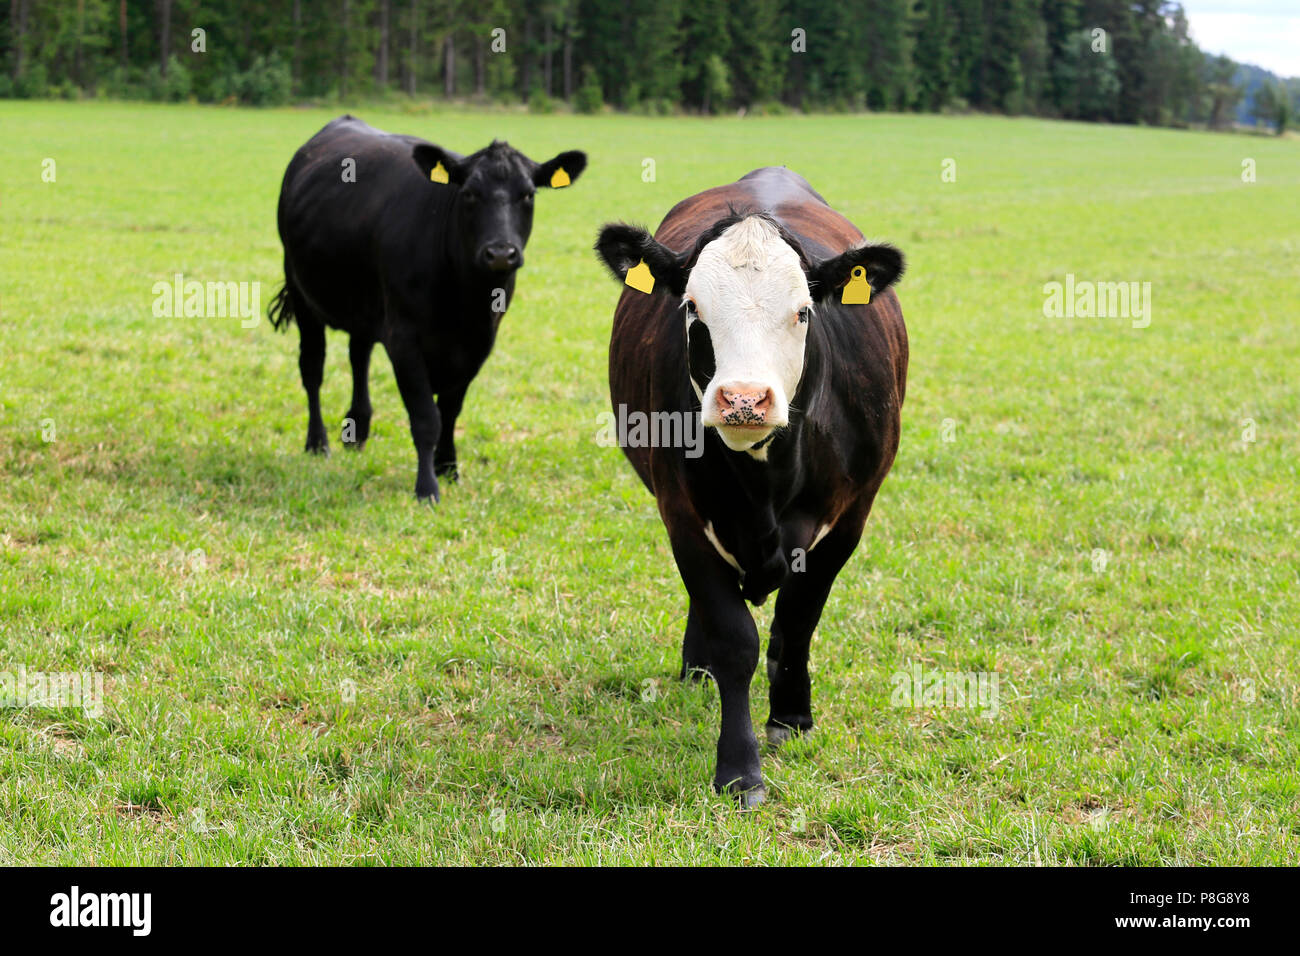 Two cows run towards the camera on a grassy field in summer. Stock Photo